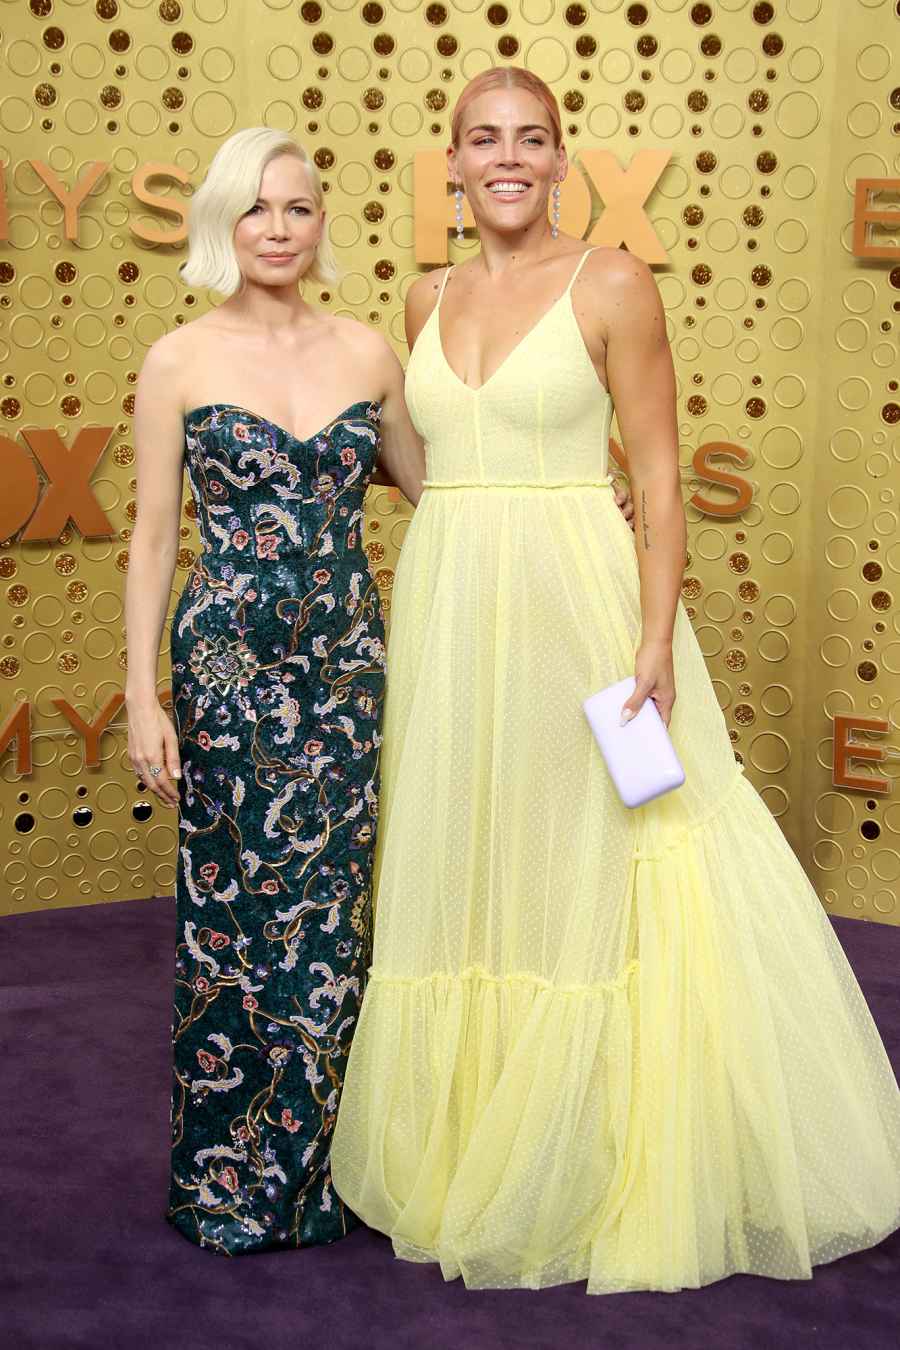 Michelle Williams and Busy Philipps What You Didn't See on TV Gallery Emmys 2019